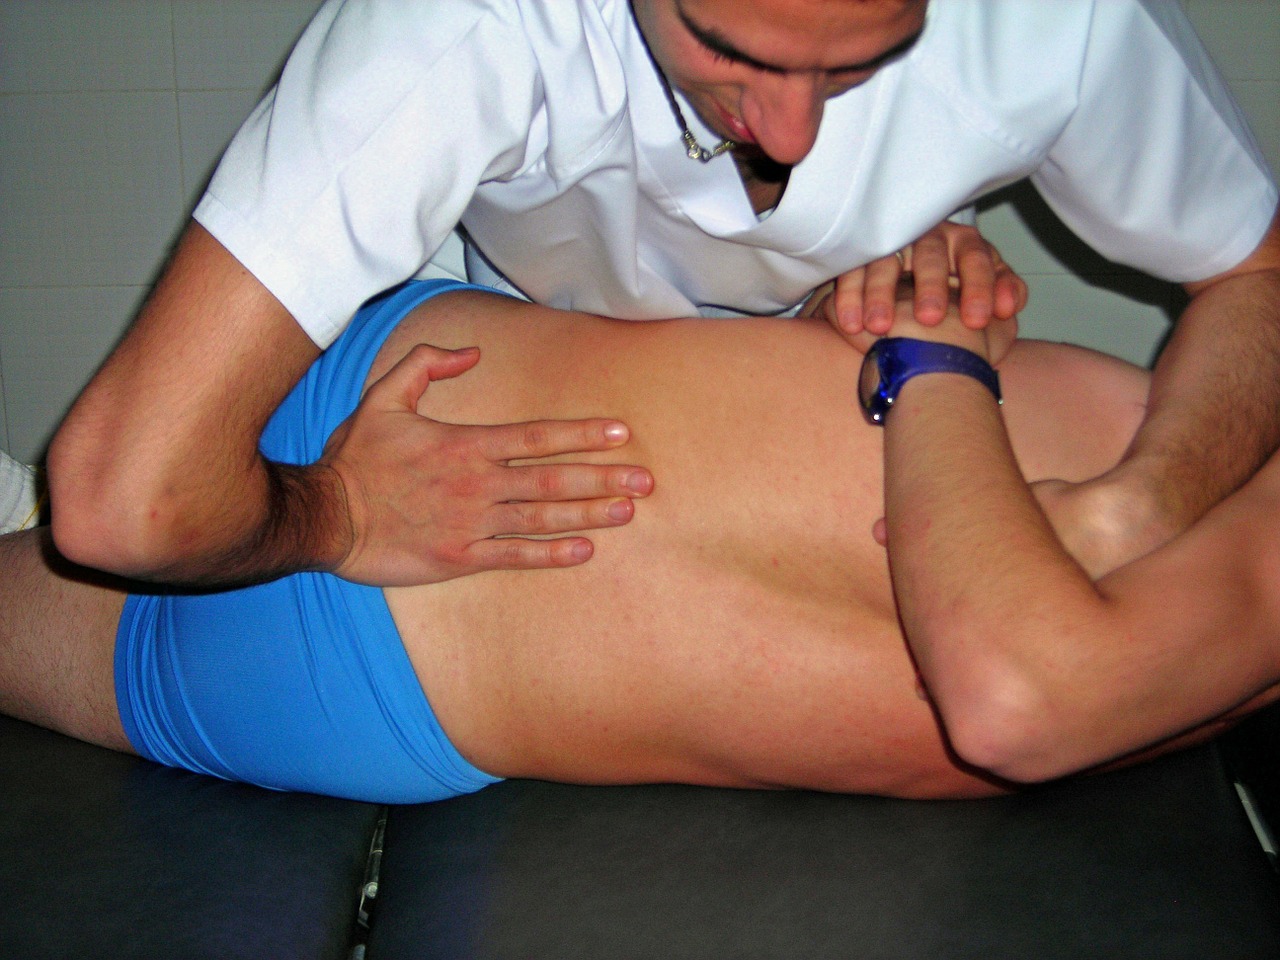 osteopathy handling therapy free photo